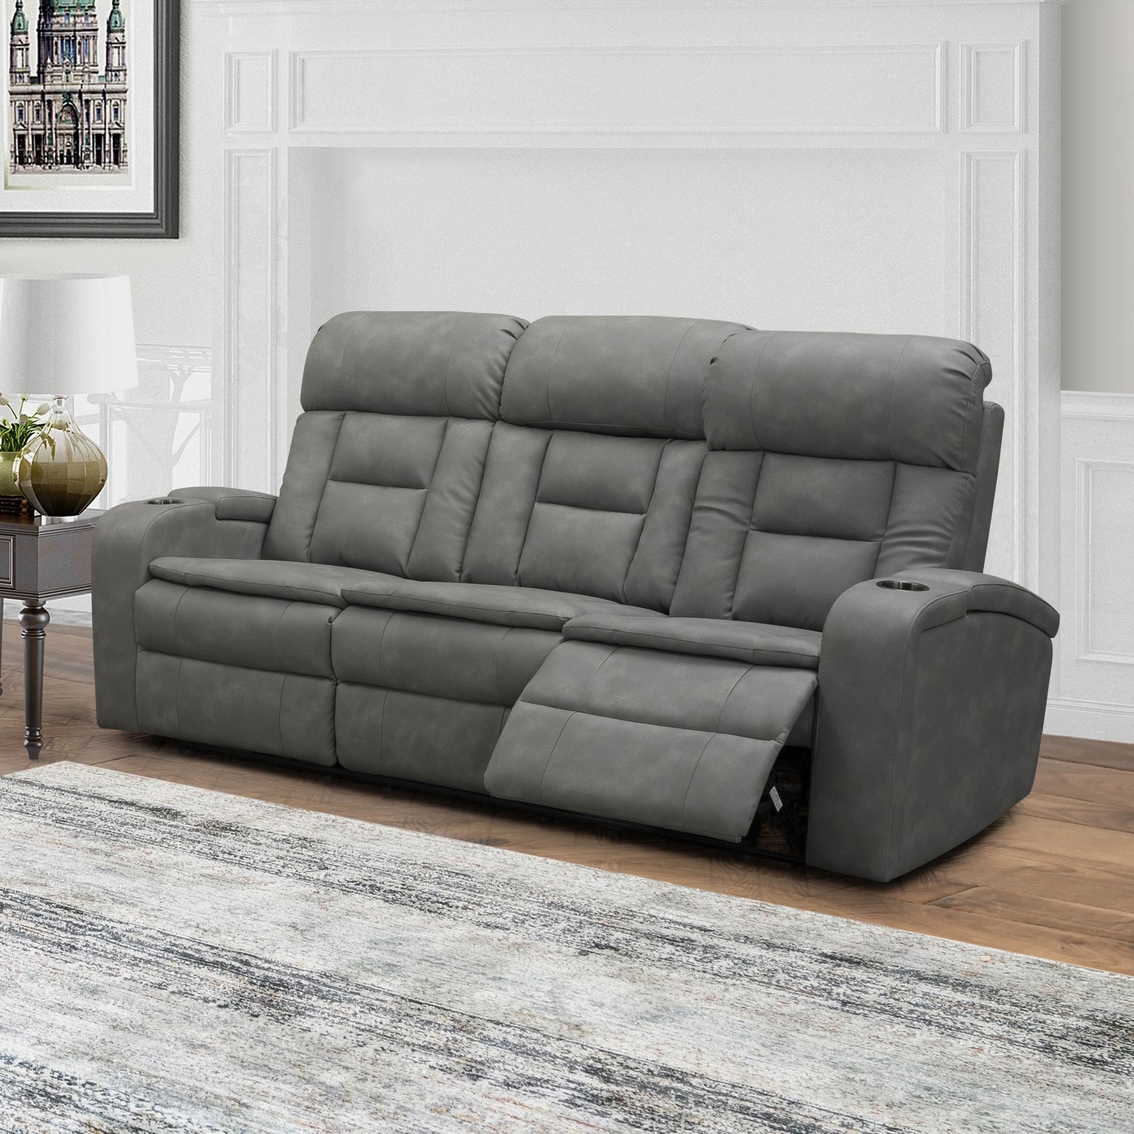 Abbyson Henley Triple Power Reclining Sofa with iTable - Image 6 of 8